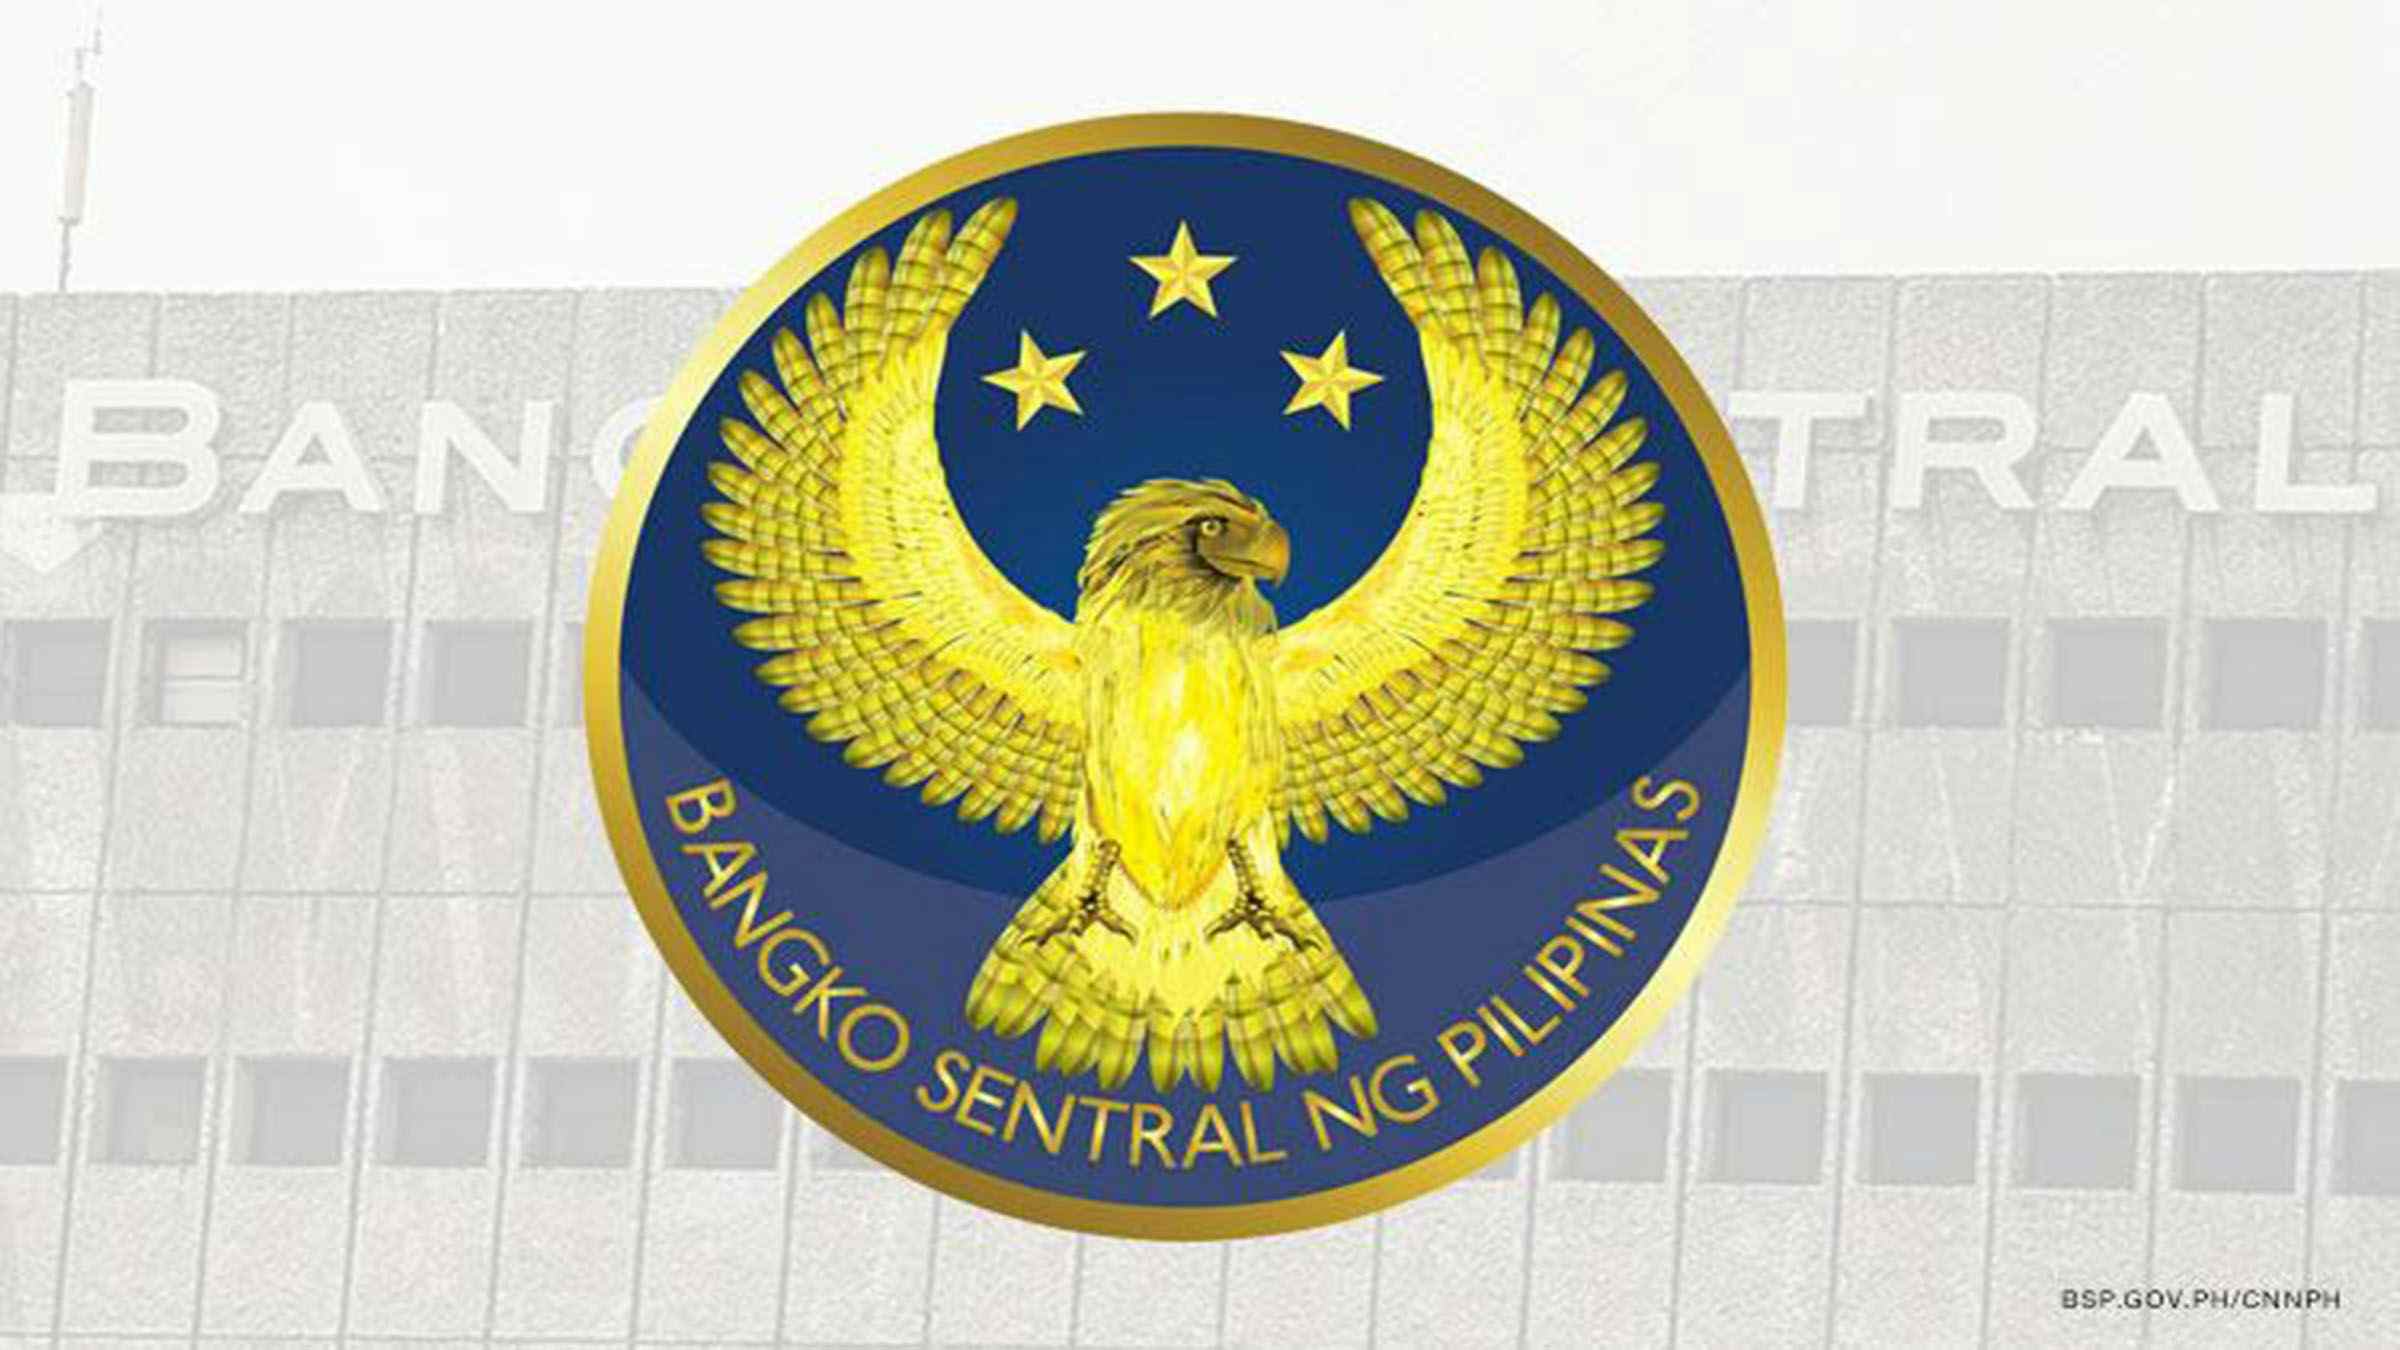 New Rates take effect March 27, BSP